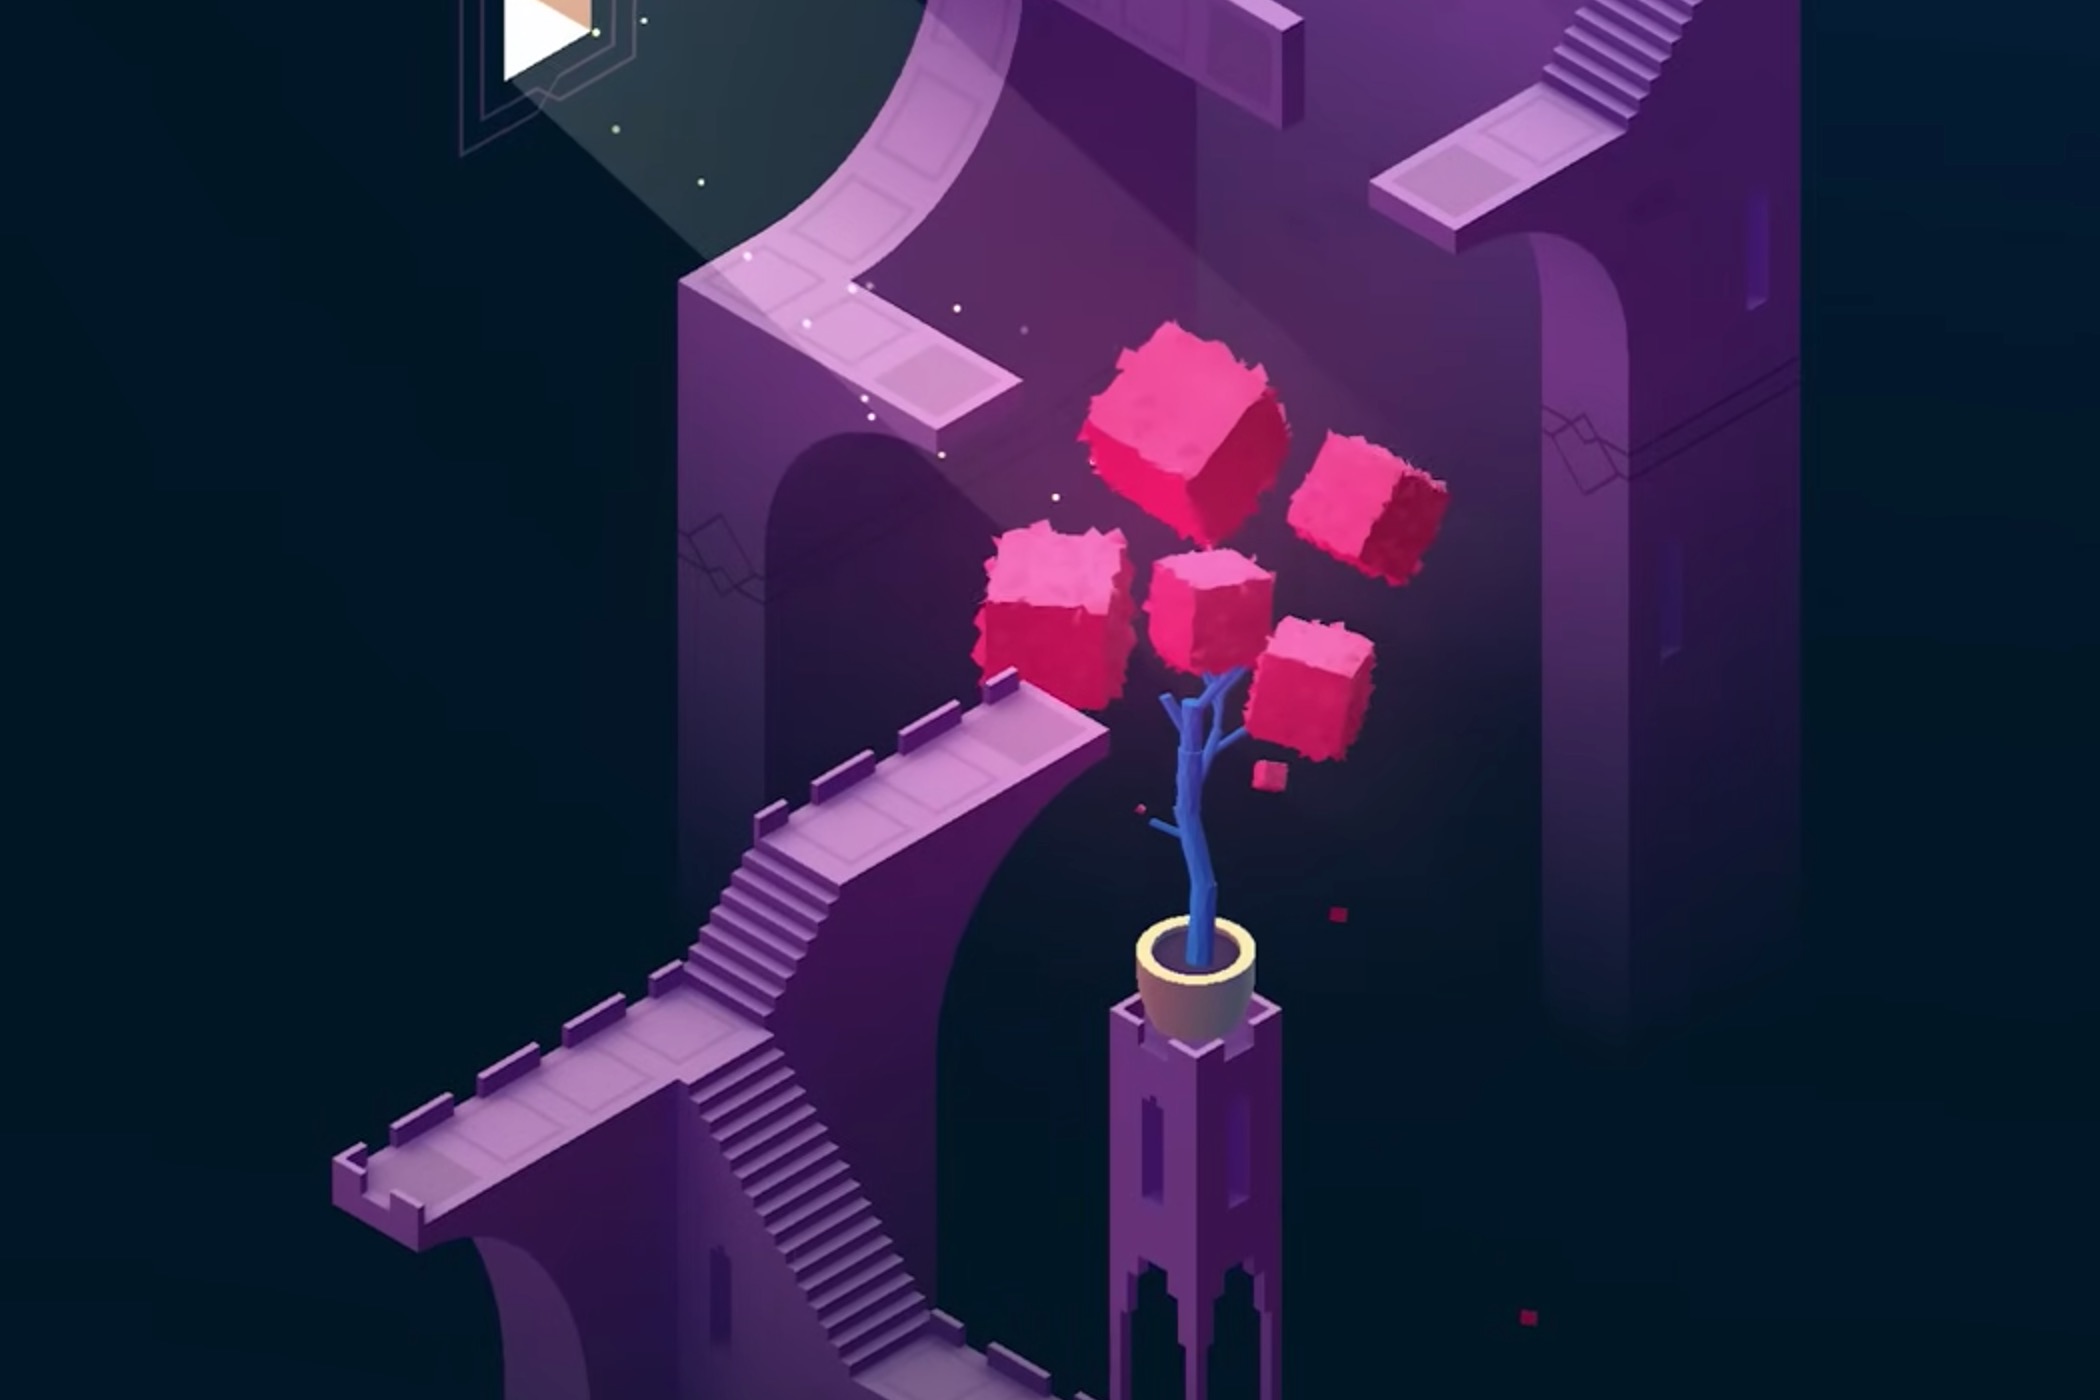 36 New And Notable Android Games From The Last 2 Weeks (2/2/16 - 2/15/16)